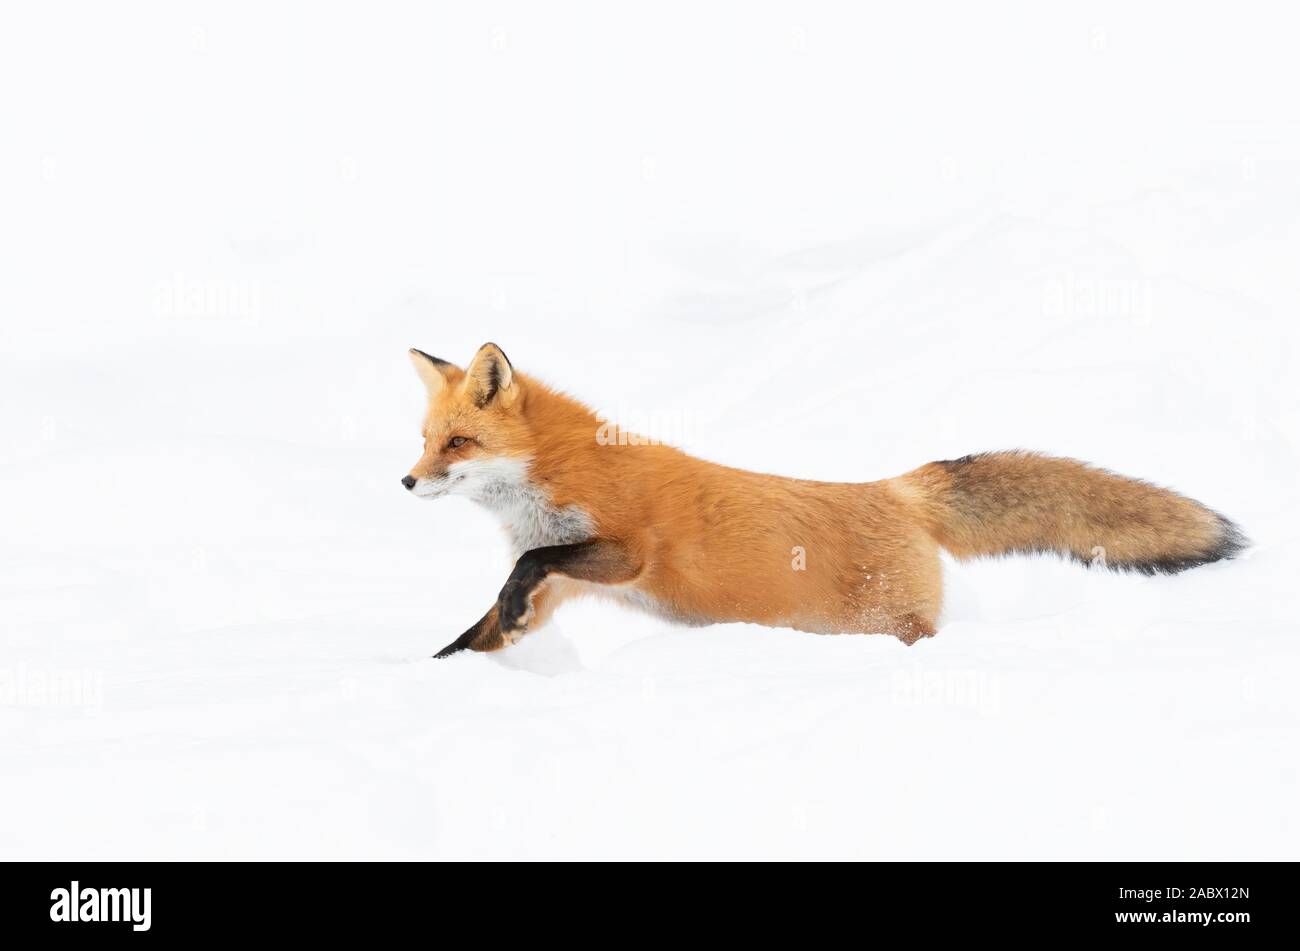 Red fox with a bushy tail and orange fur coat isolated on white background running through the freshly fallen snow in winter in Algonquin Park, Canada Stock Photo